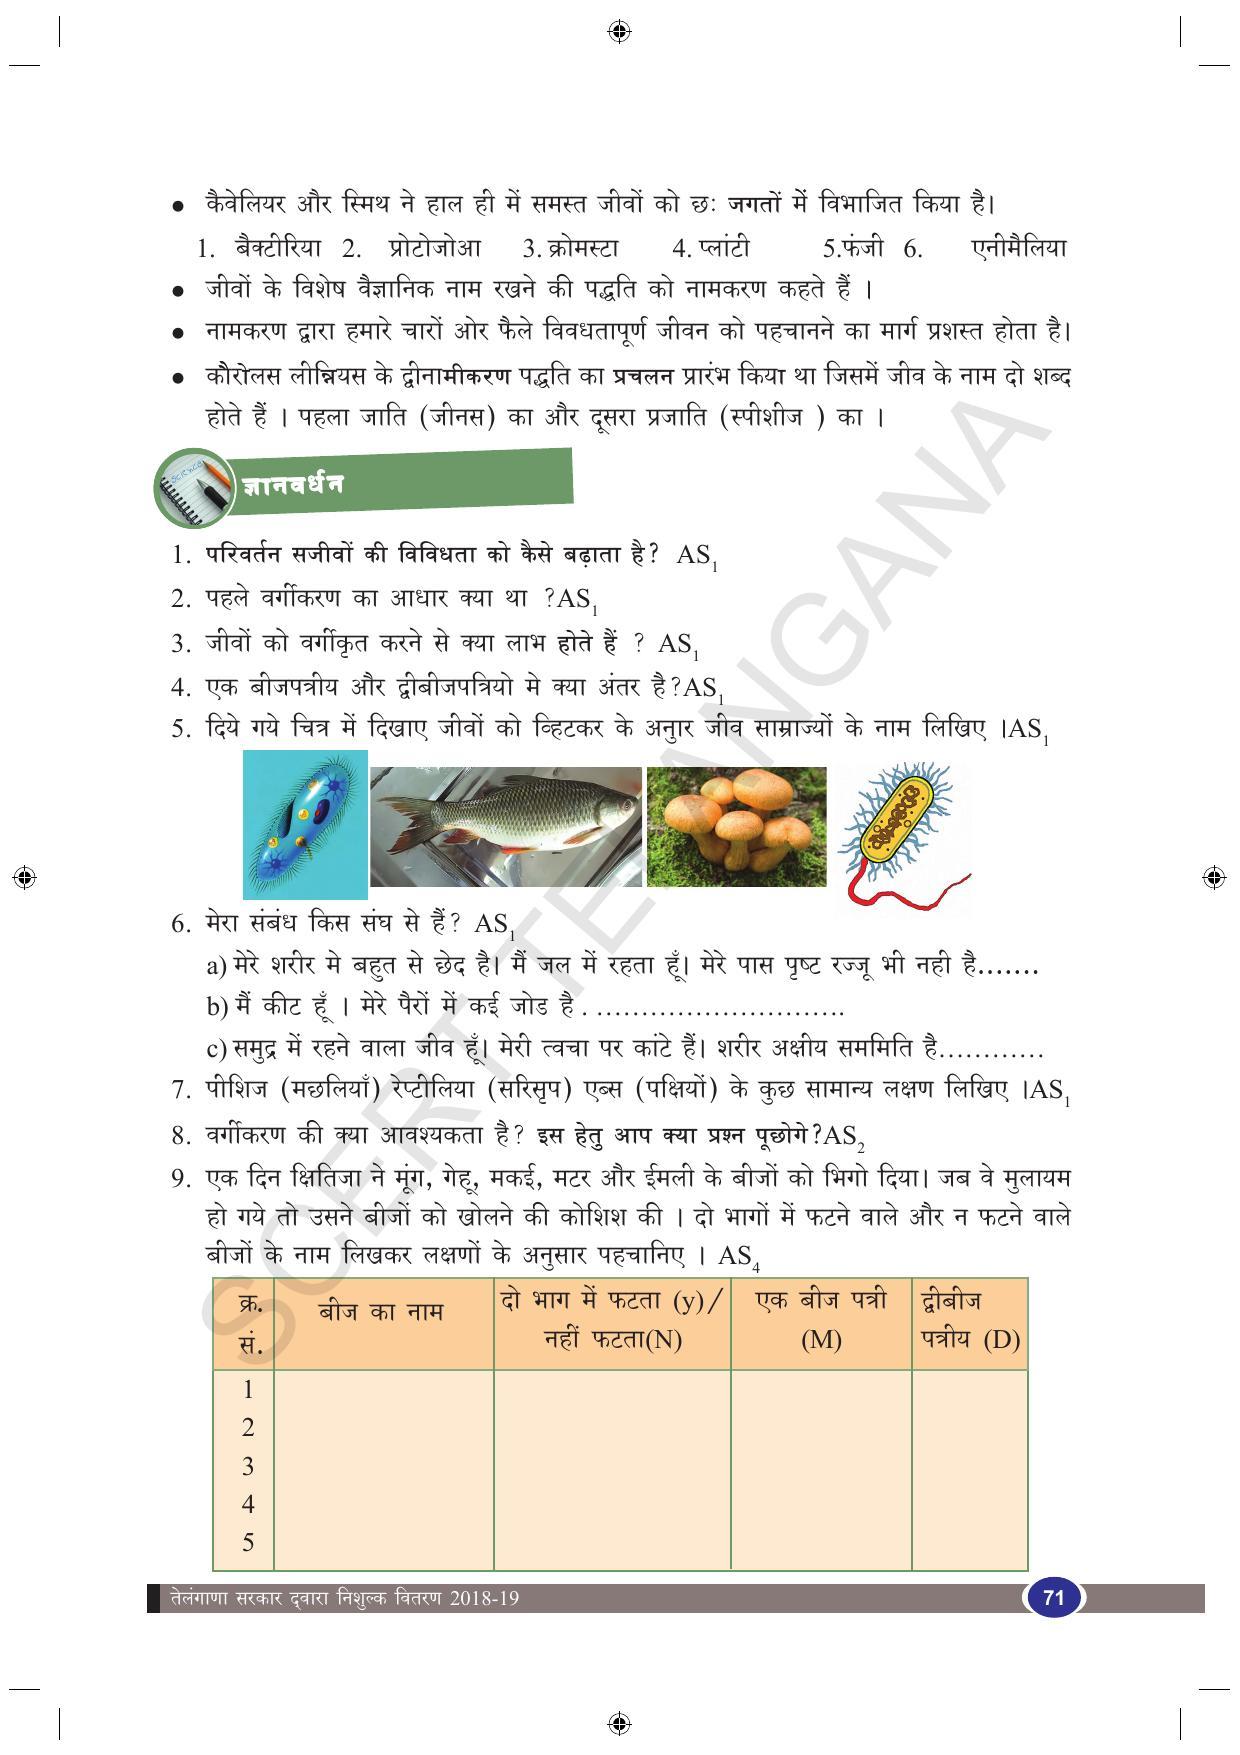 TS SCERT Class 9 Biological Science (Hindi Medium) Text Book - Page 83